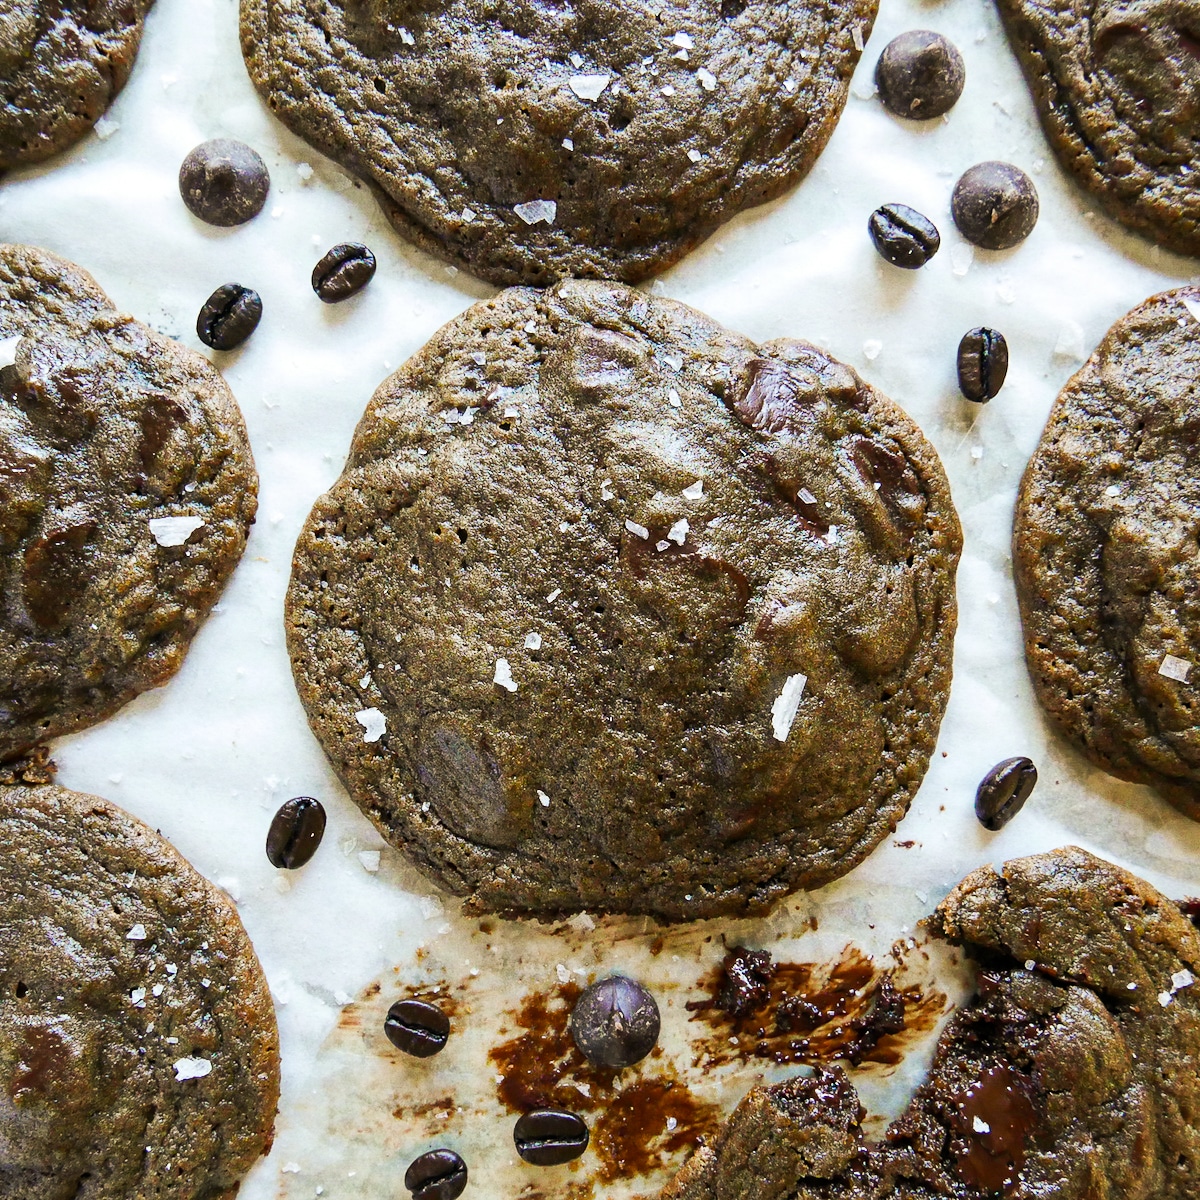 chewy espresso cookies arranged on parchment with coffee beans.